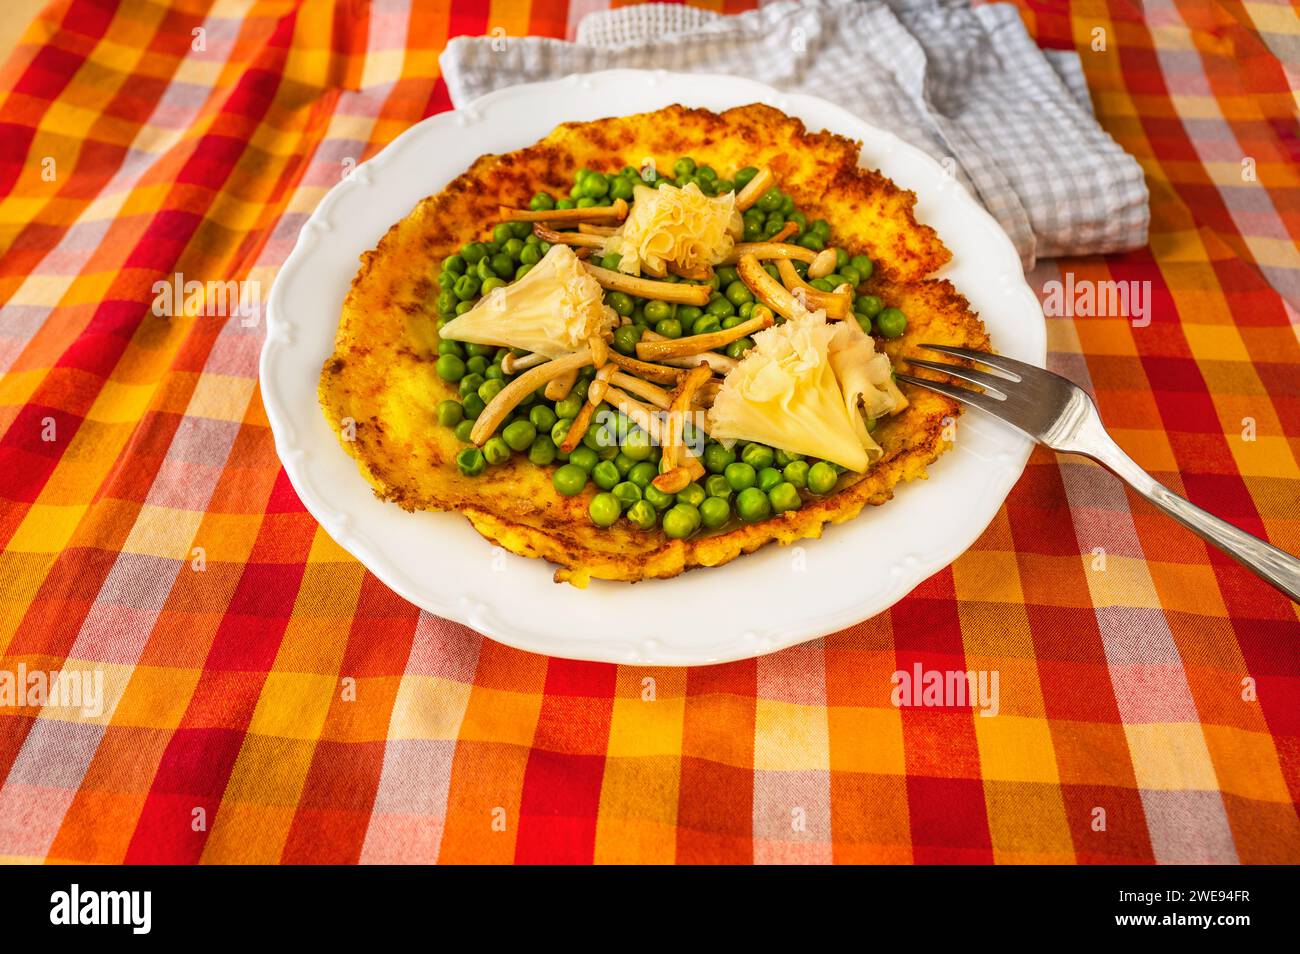 Egg omelette with boiled pea, fried shimeji mushroom and rose-shaped swiss cheese on white plate with fork on red-orange checkered tablecloth, towel, Stock Photo